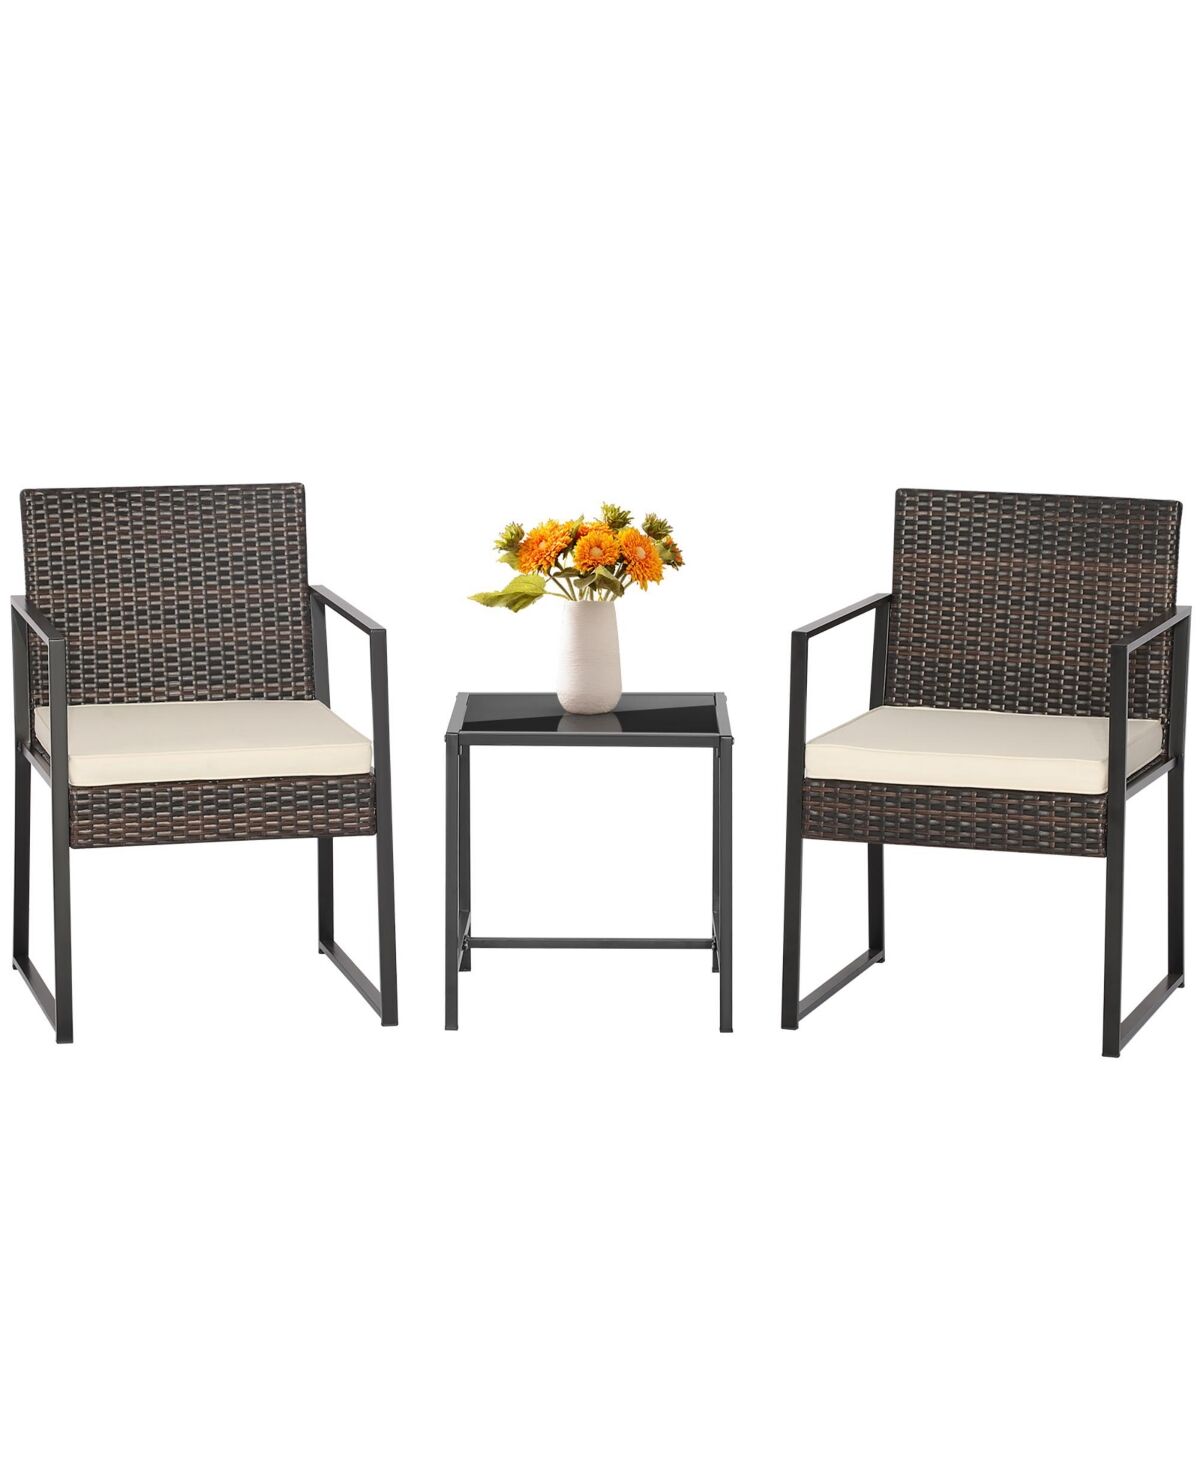 Costway 3pcs Patio Furniture Set Heavy Duty Cushioned Wicker Rattan Chairs Table - White